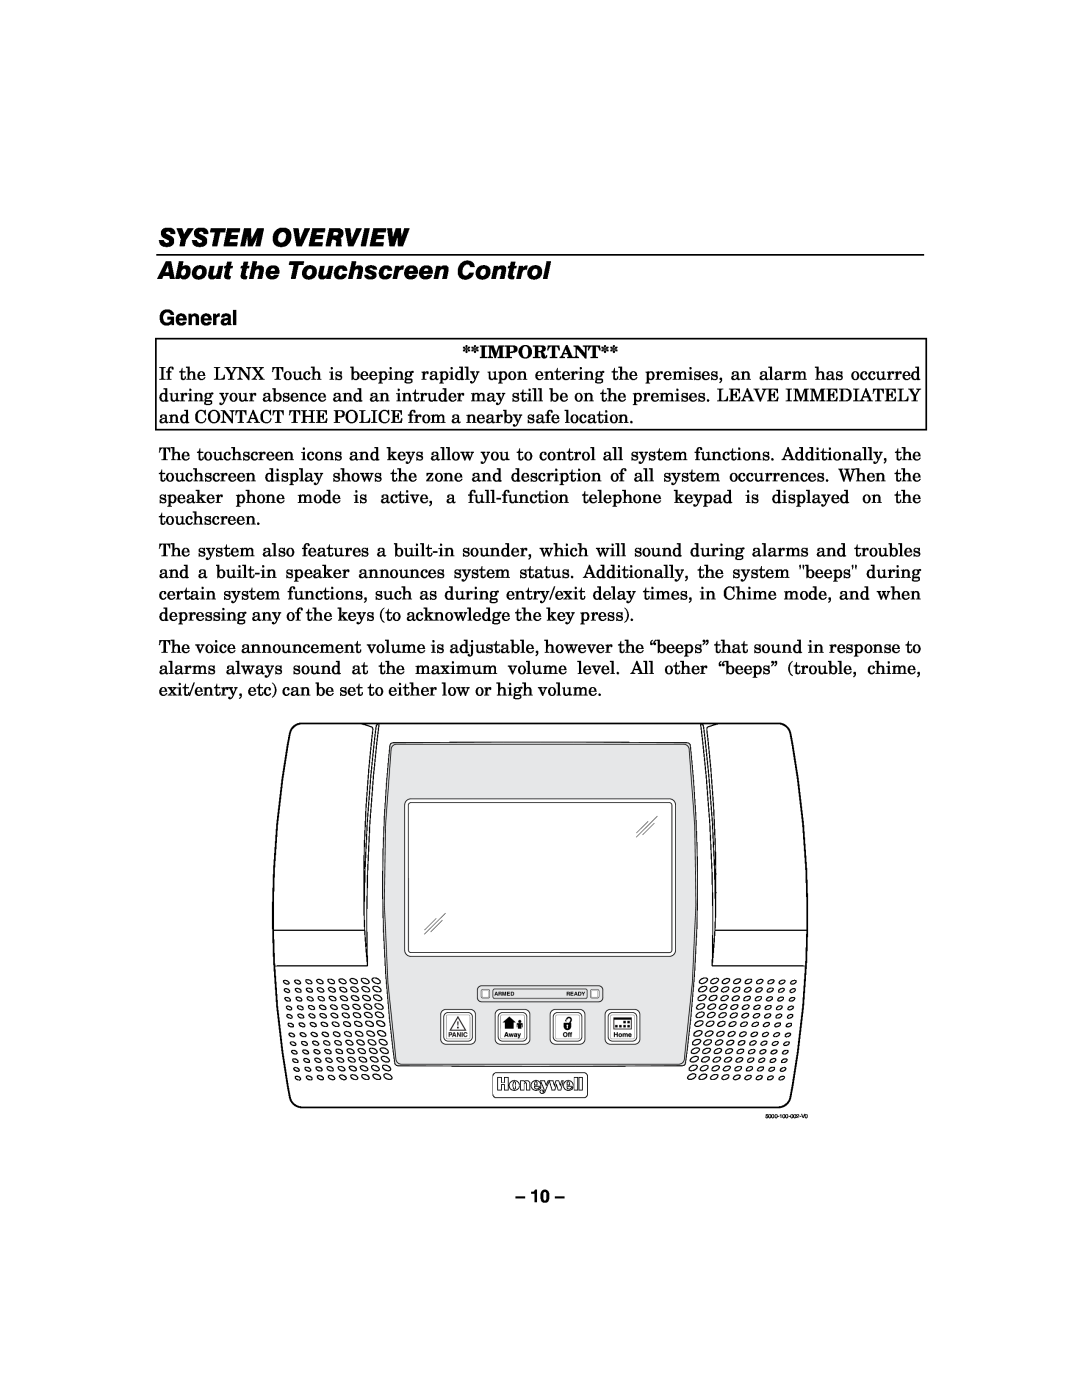 Honeywell 800-06894 manual SYSTEM OVERVIEW About the Touchscreen Control, General 